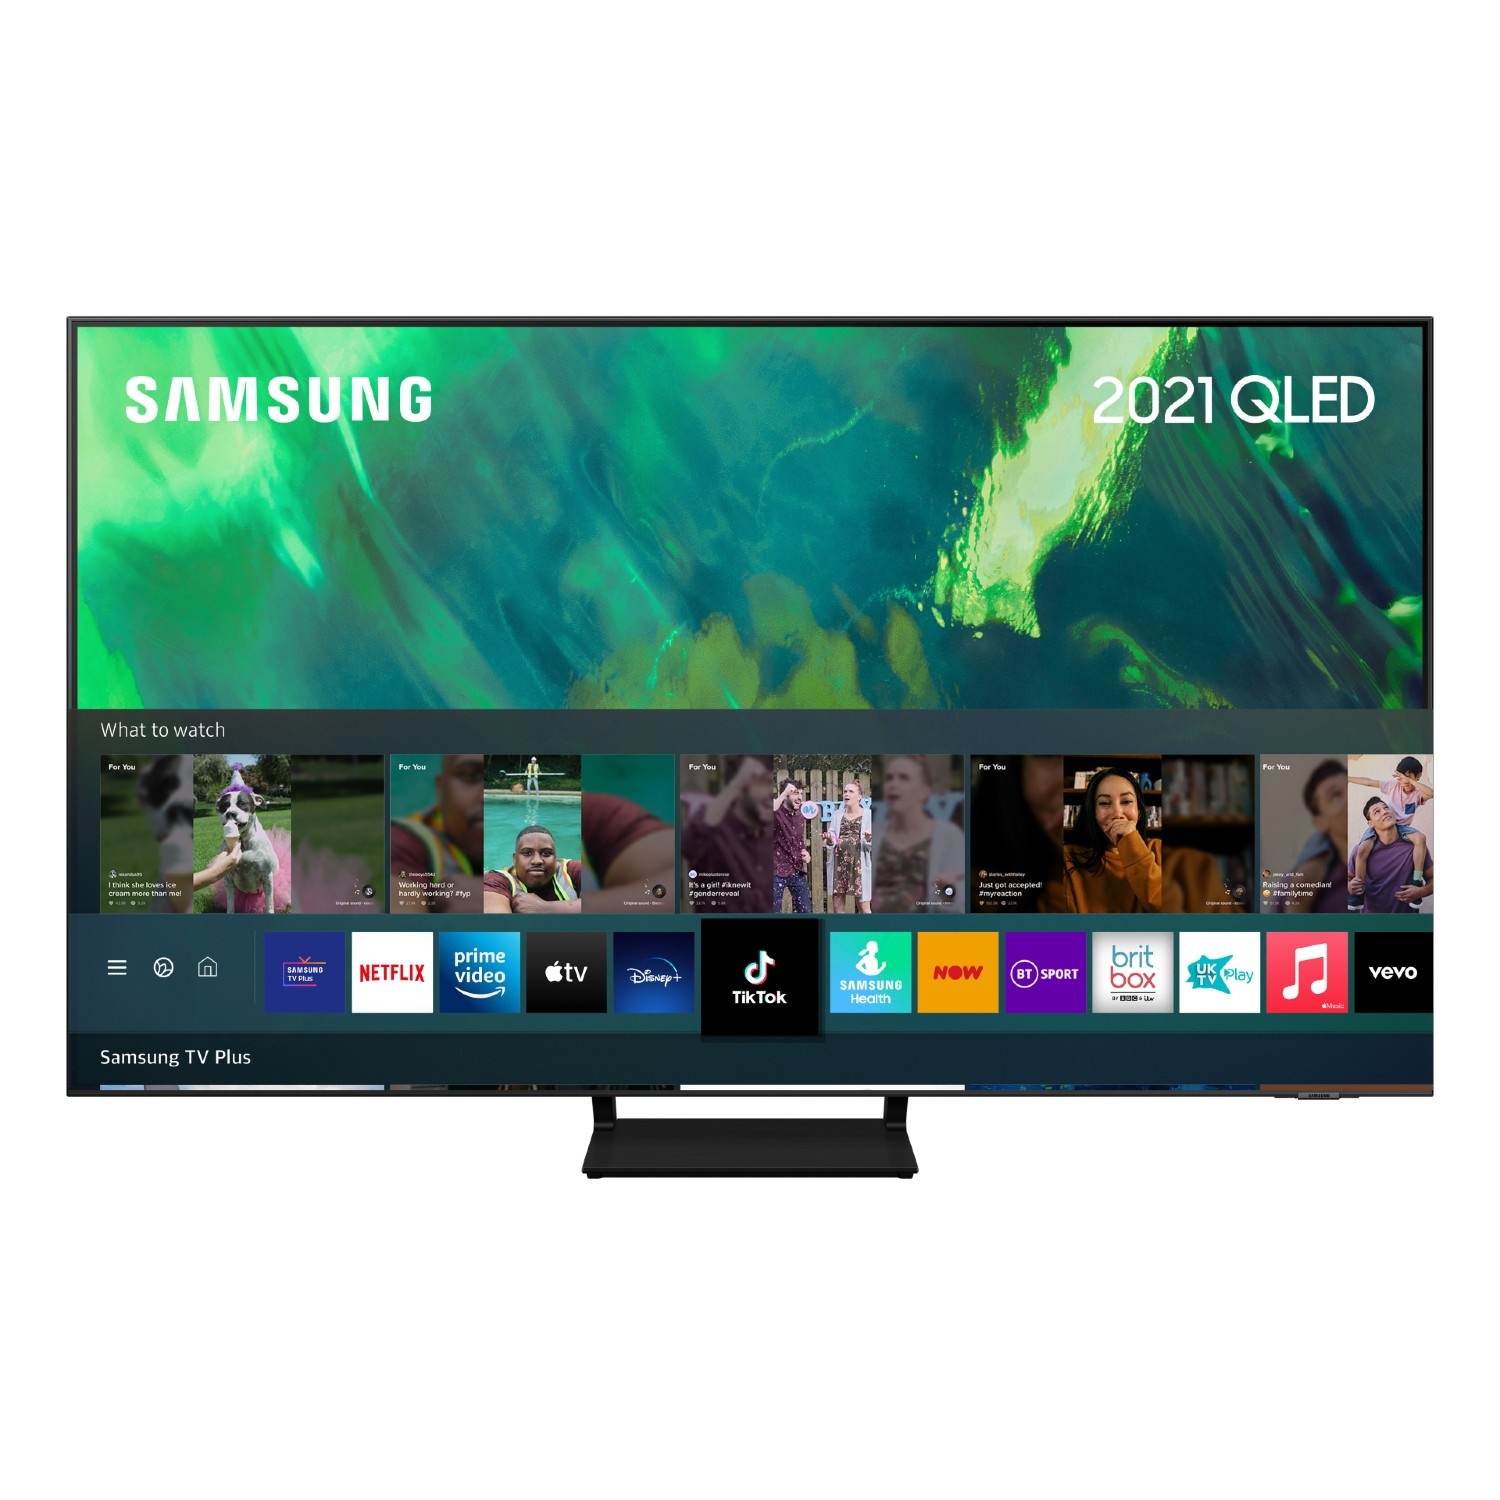 Samsung QE55Q70AATXXU 55" 4K QLED Smart TV Quantum HDR powered by HDR10 + 4K picture with AI sound. - 0